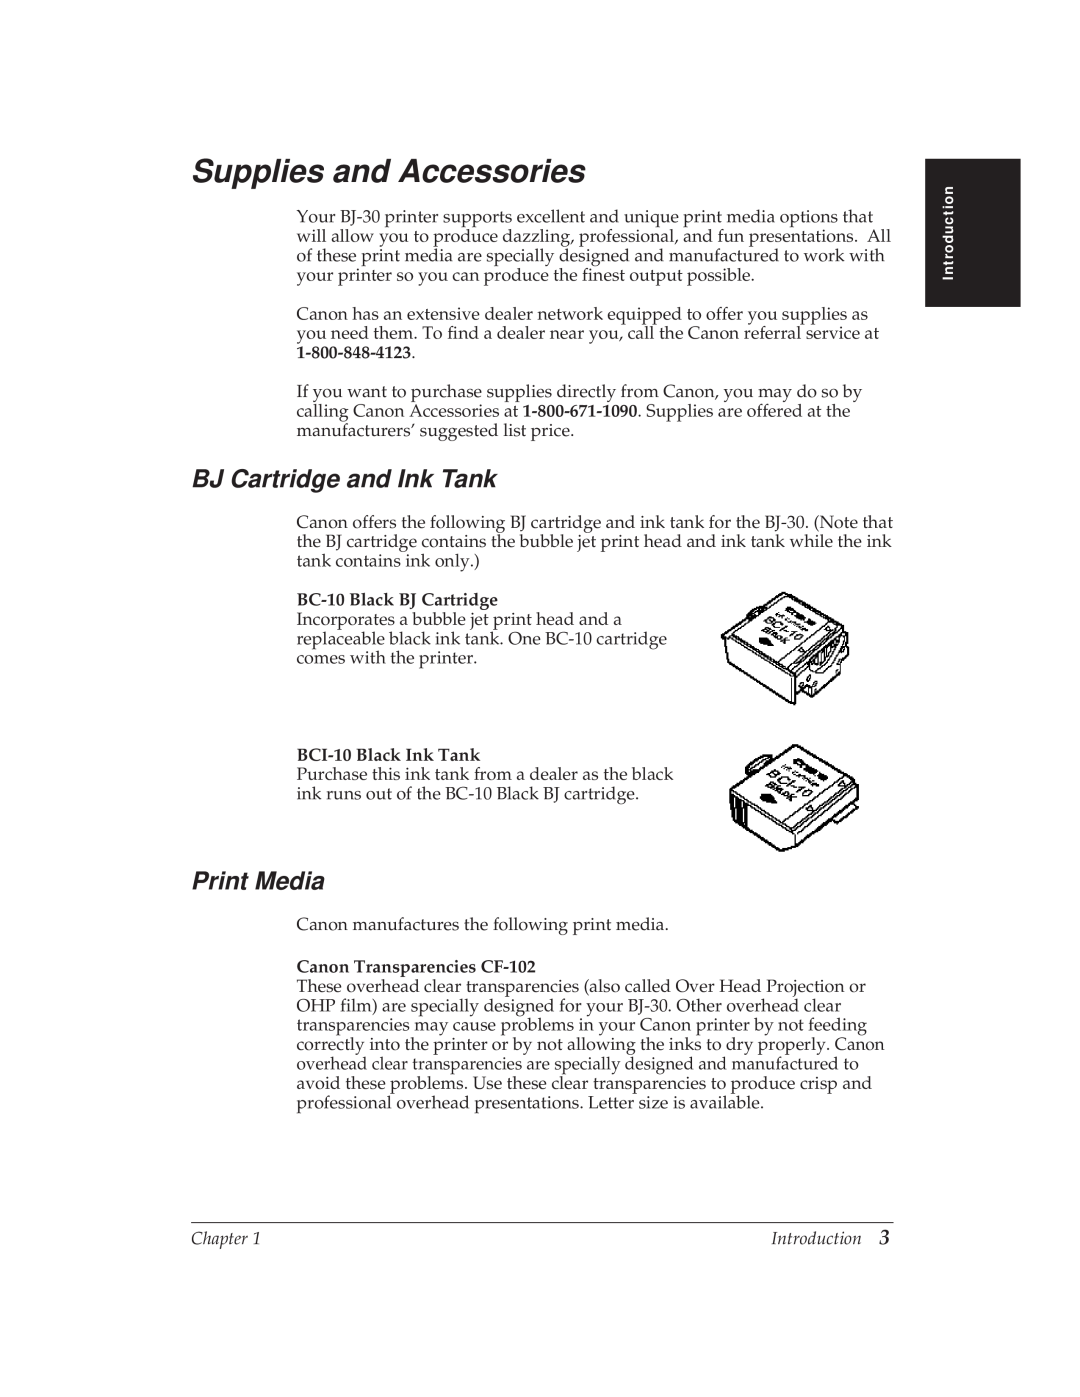 Canon BJ-30 manual Supplies and Accessories, BJ Cartridge and Ink Tank, Print Media, BC-10 Black BJ Cartridge 